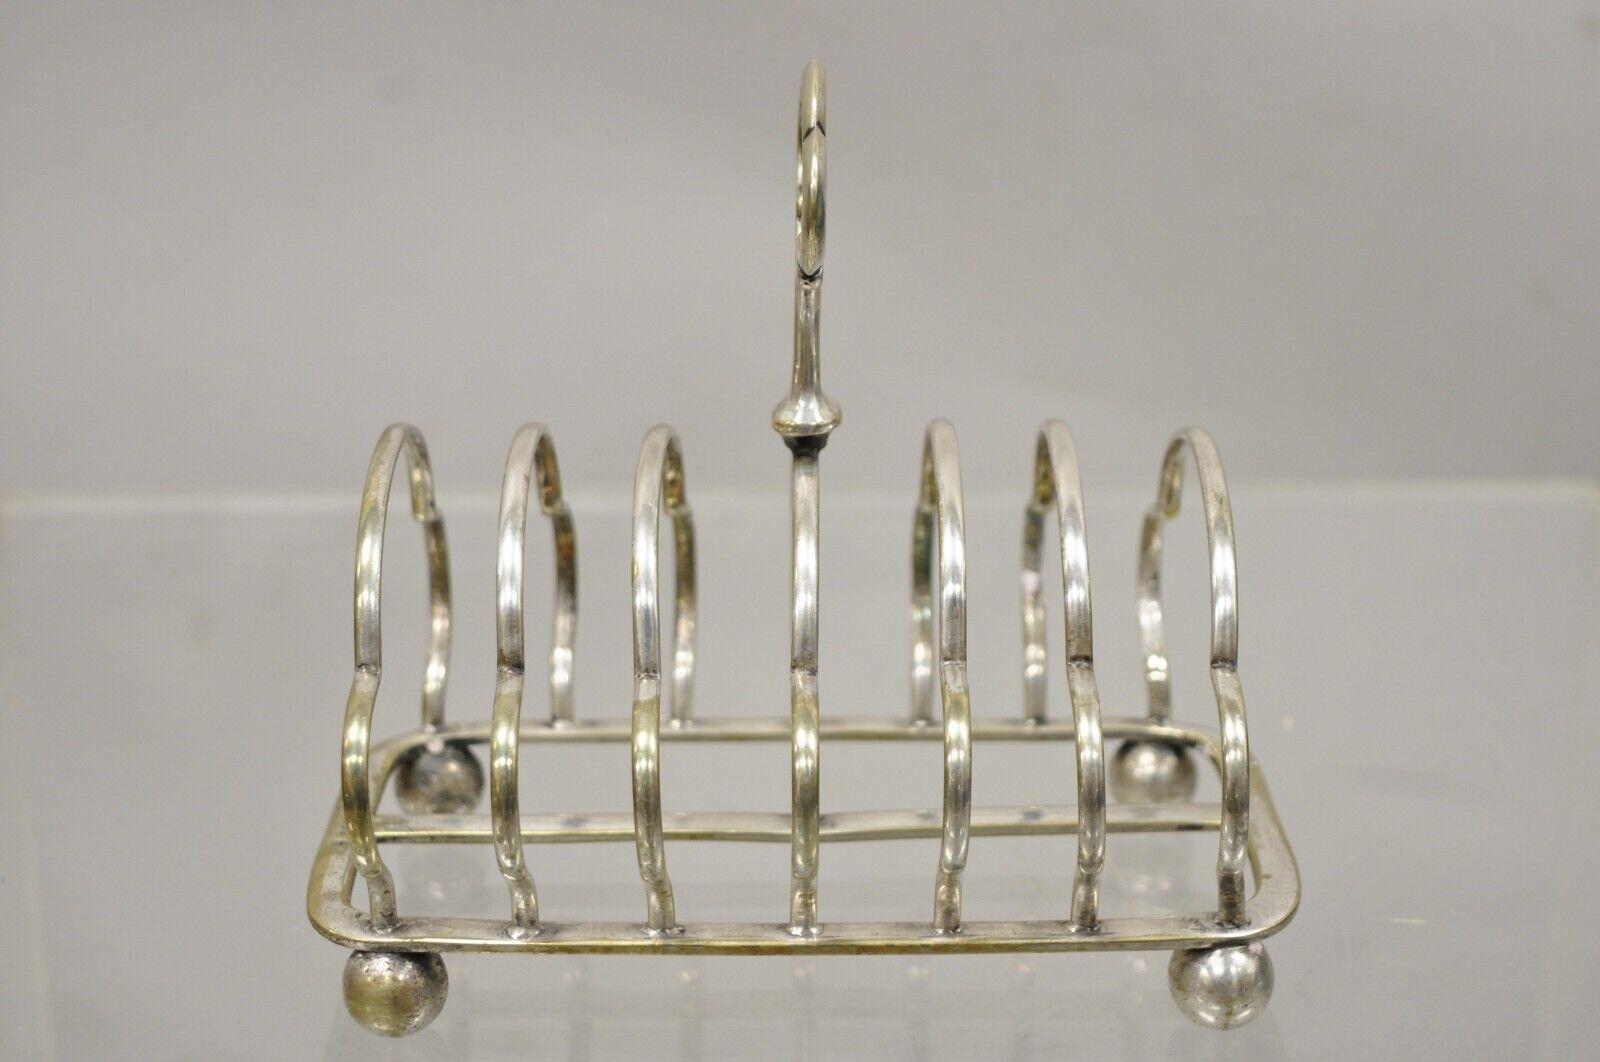 Antique English Regency silver plated toast rack letter holder ball feet (B). Item featured is raised on ball form feet, shaped divider, 6 slots, very nice antique item, quality English craftsmanship, great for use as a letter holder. Circa Early